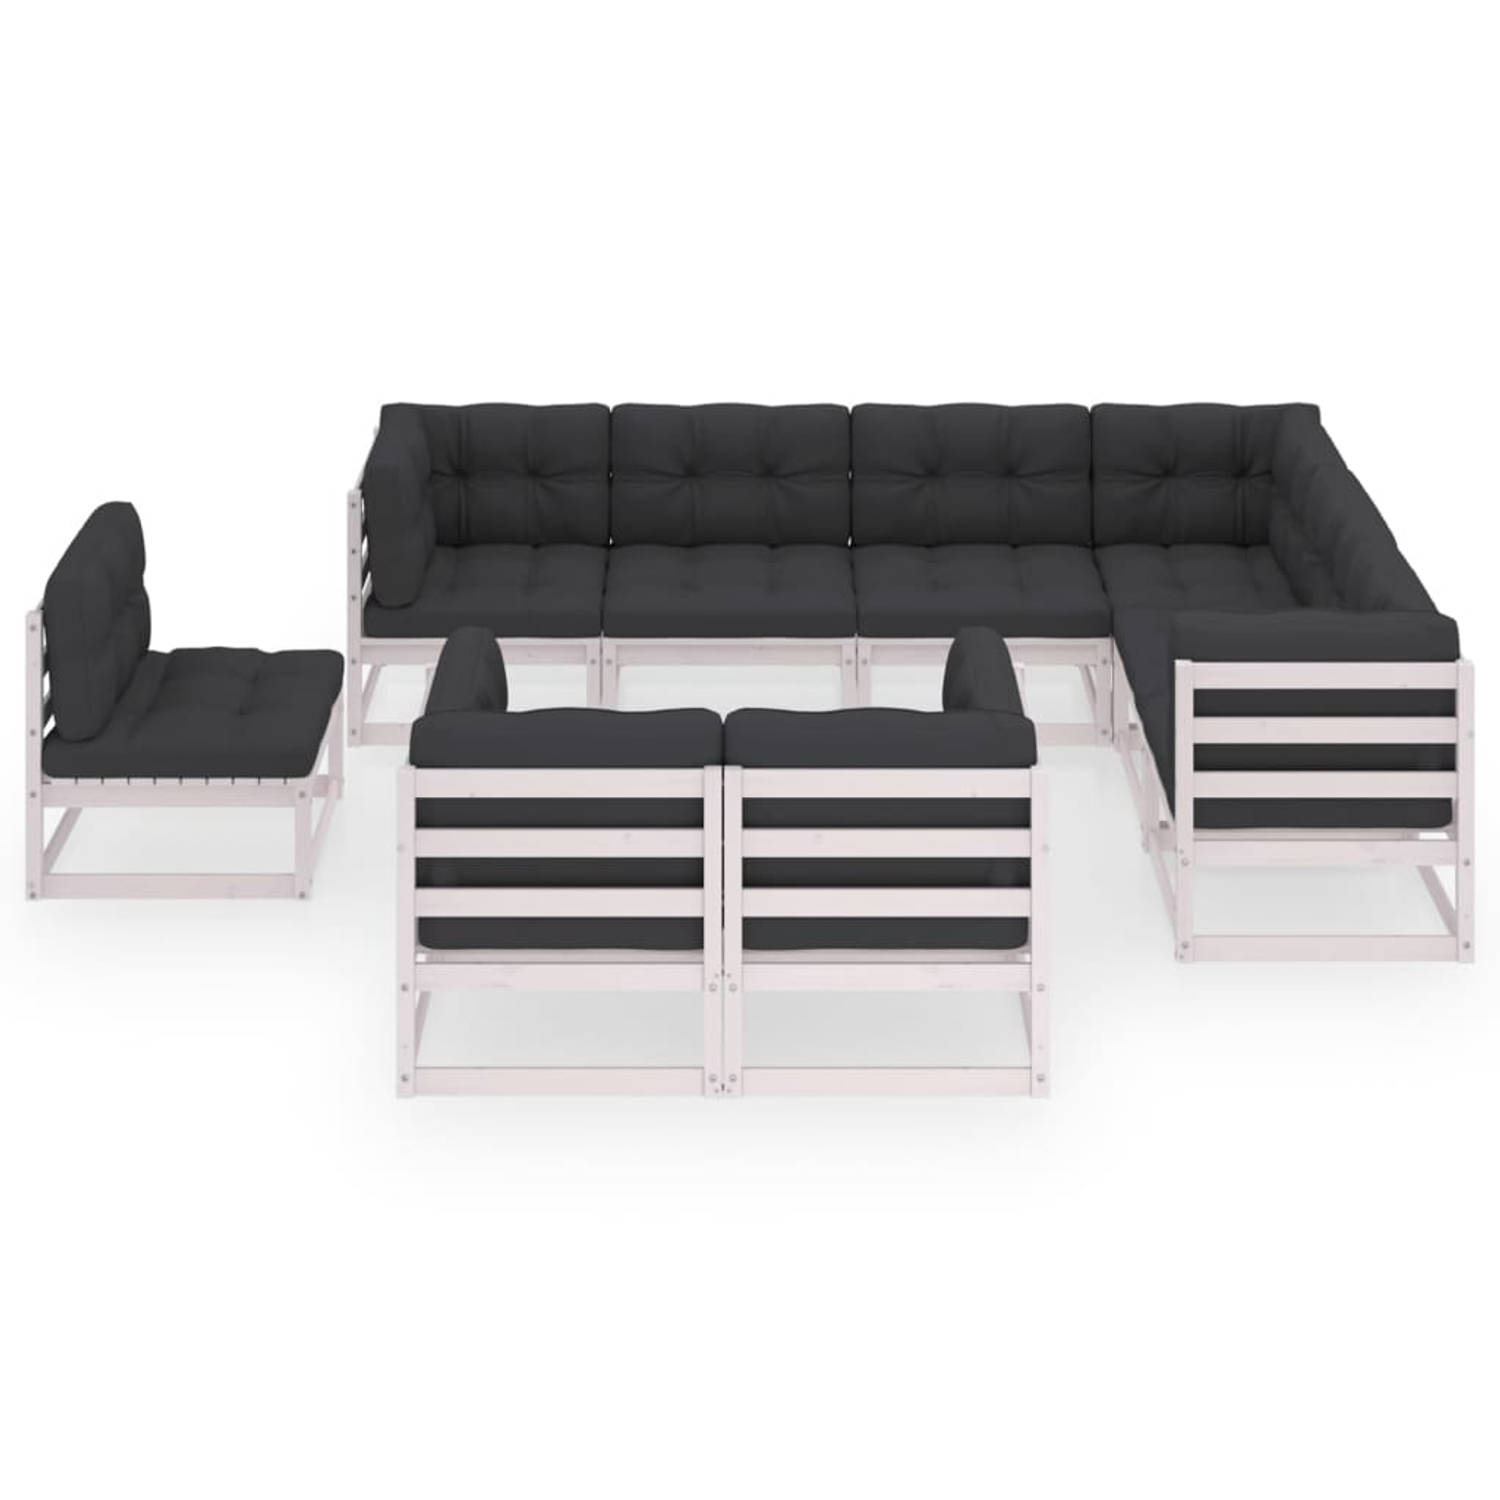 The Living Store 9-delige Loungeset met kussens massief grenenhout wit - Tuinset